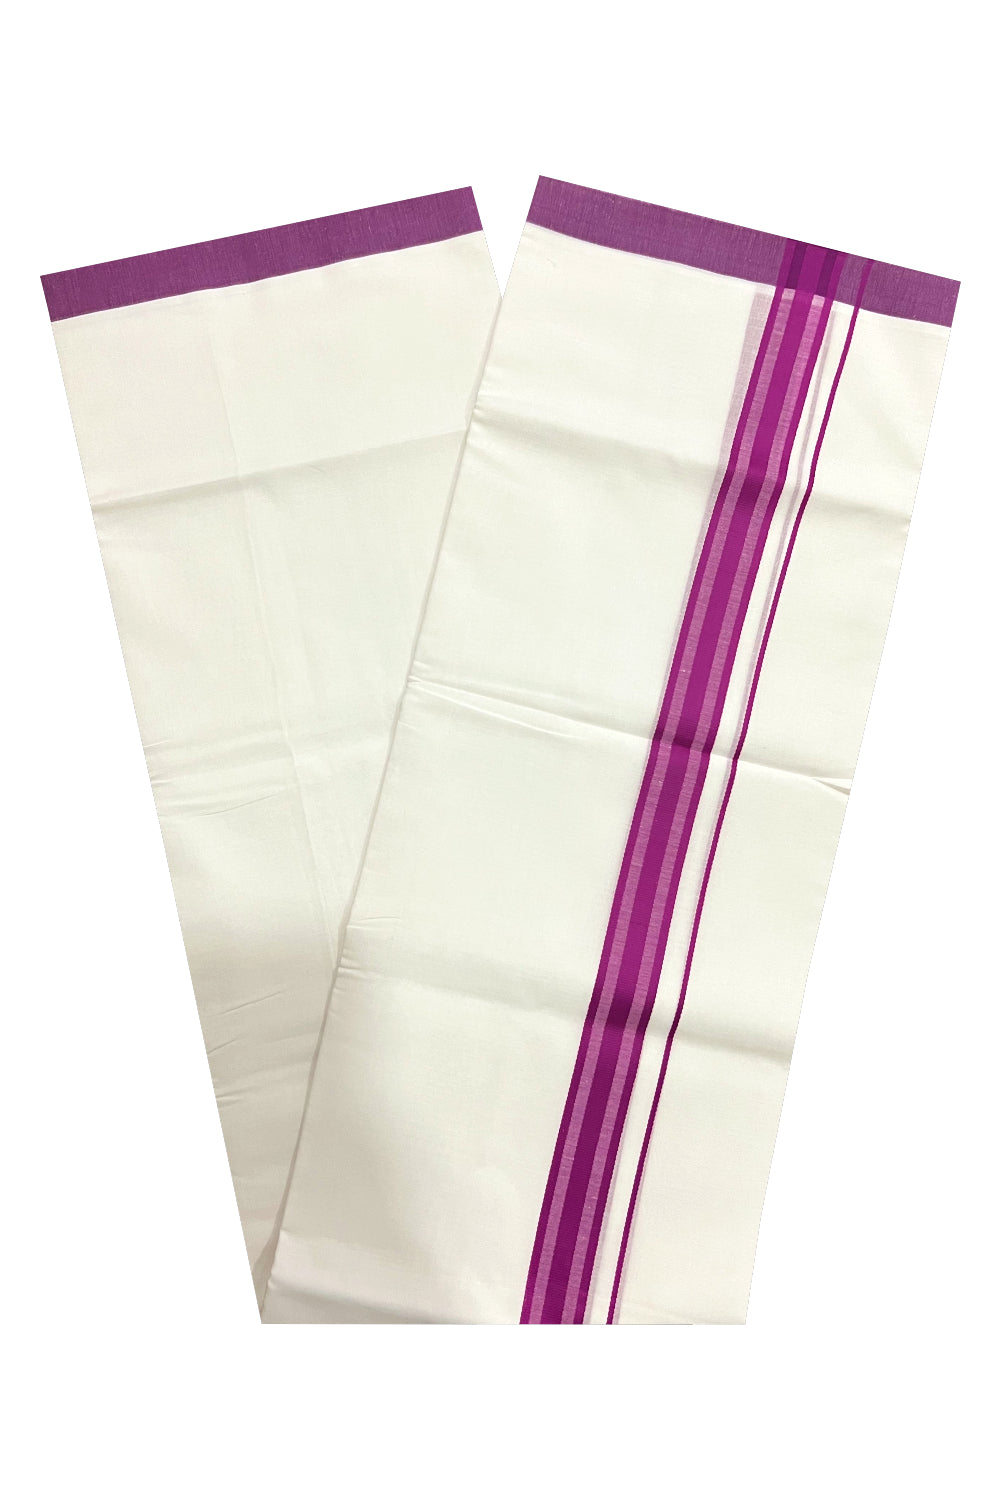 Pure White Cotton Double Mundu with Magenta Line Border (South Indian Dhoti)